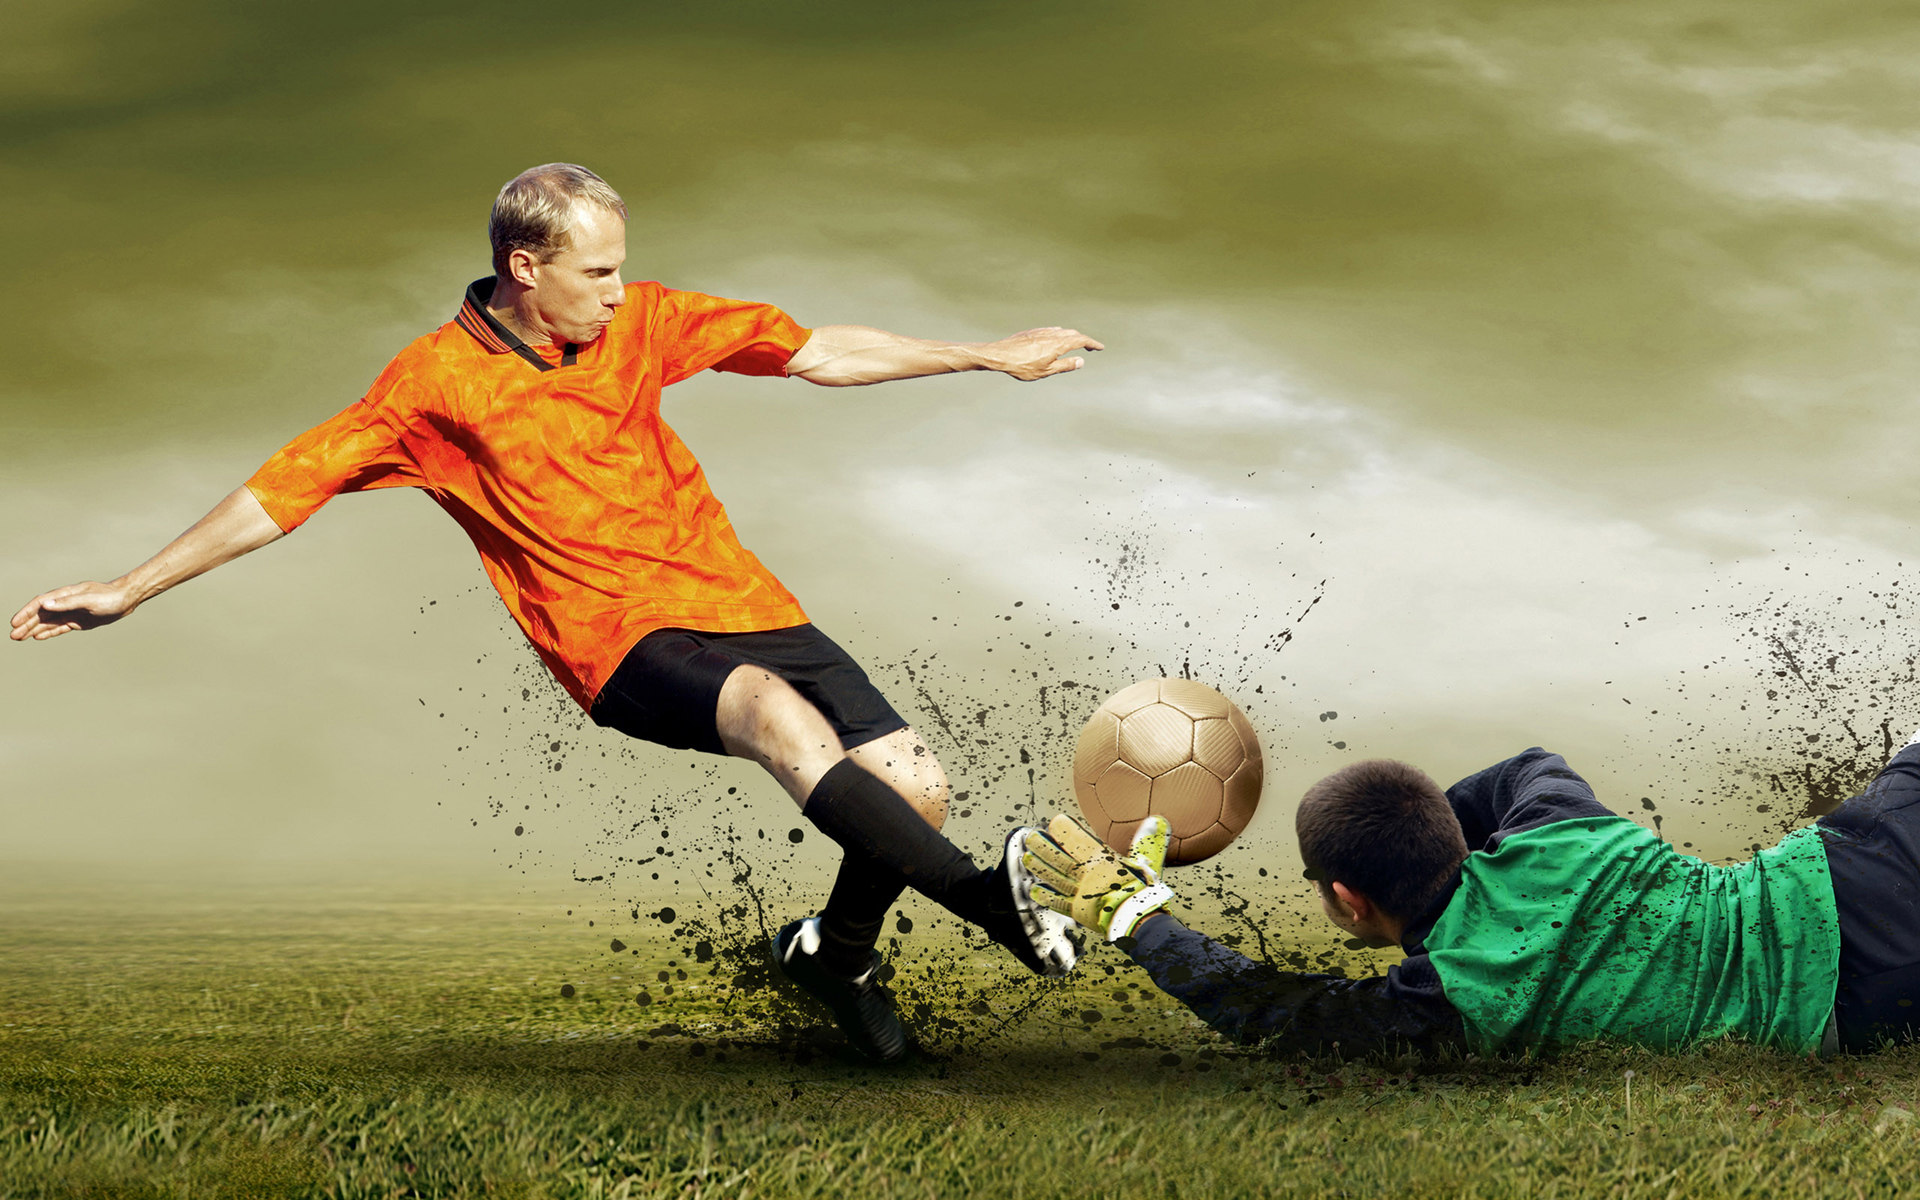 HD Soccer Wallpaper You Are Ing The Sports Named